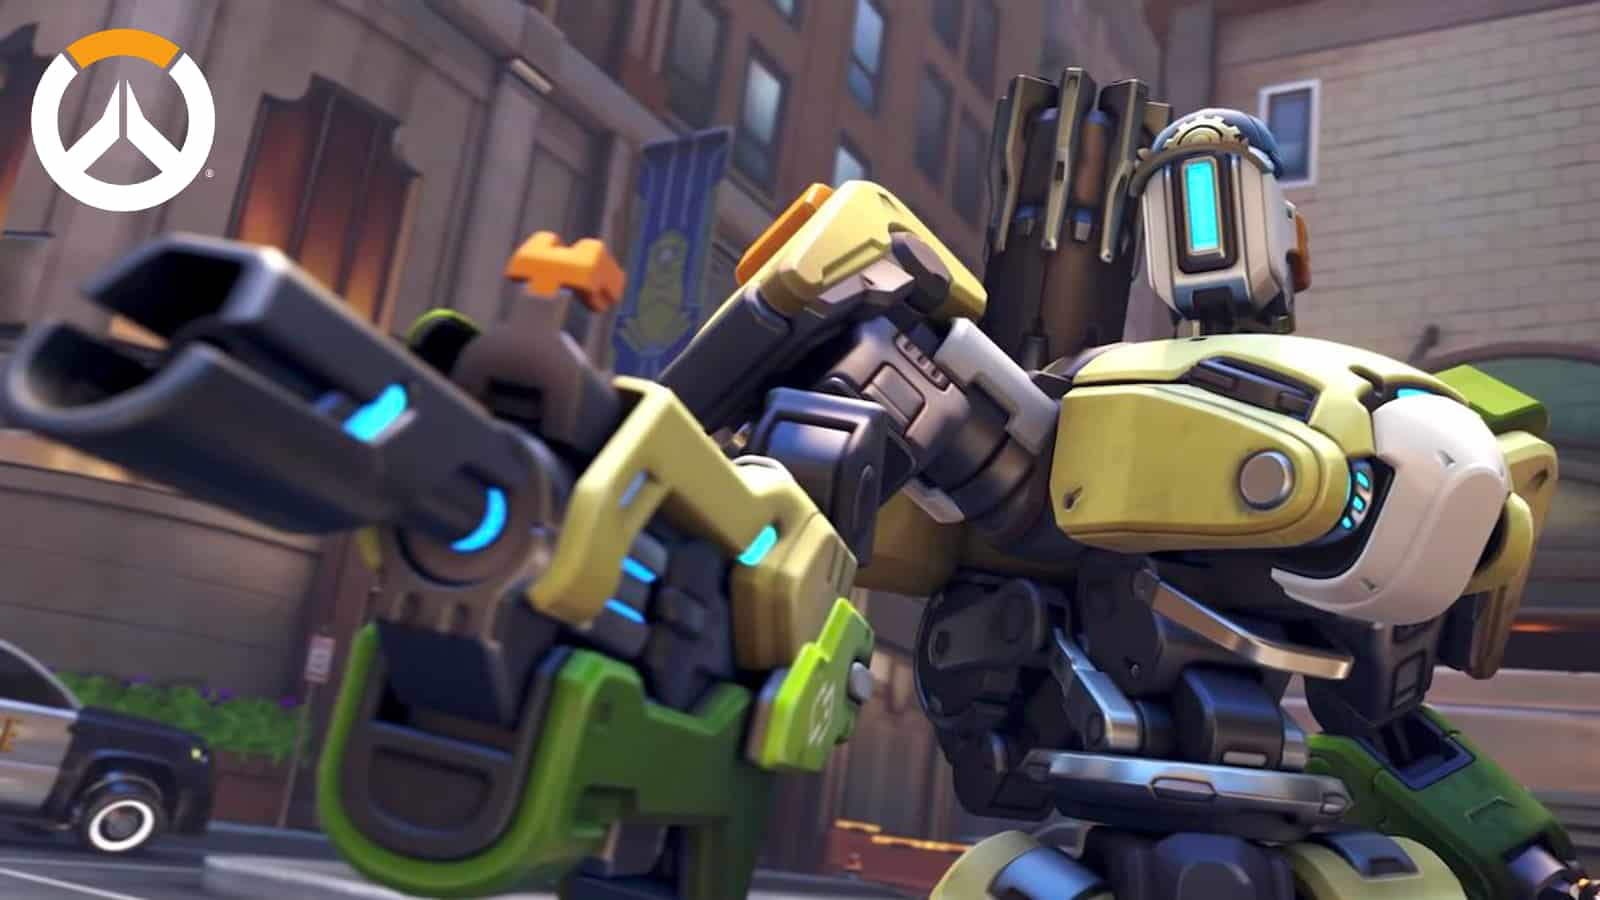 Bastion’s Overwatch 2 OWL skins come with a ‘cool’ new look